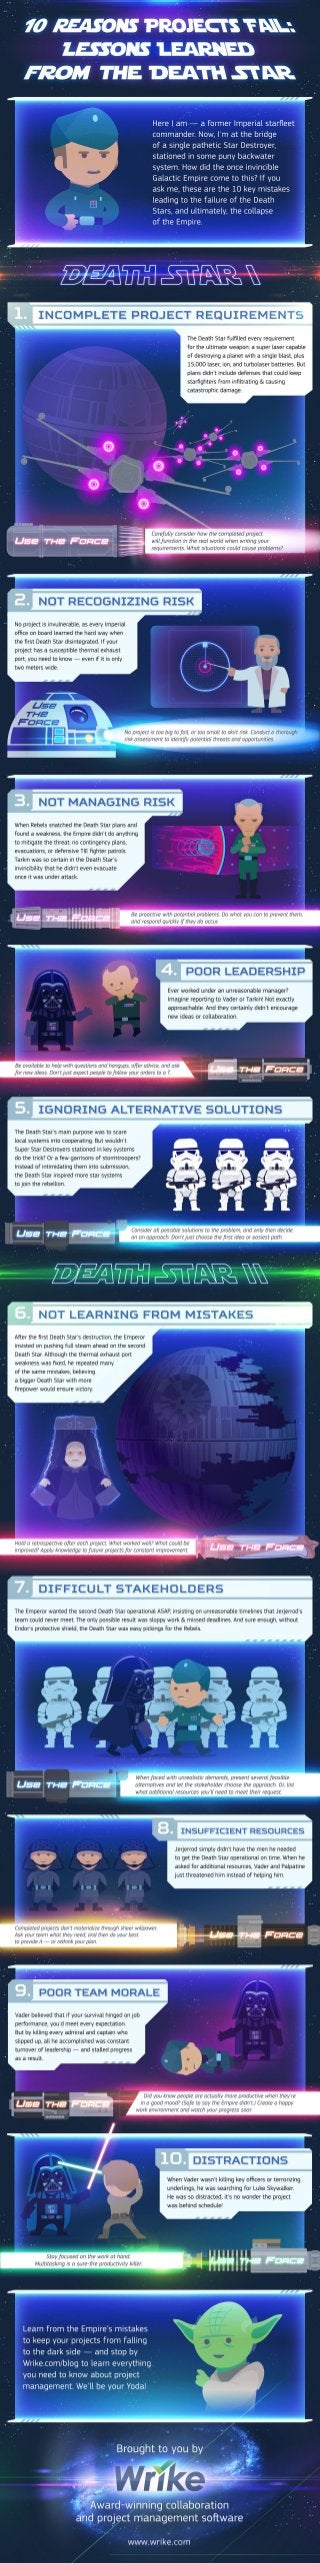 10 Reasons the Death Star Failed: Project Management Lessons Learned